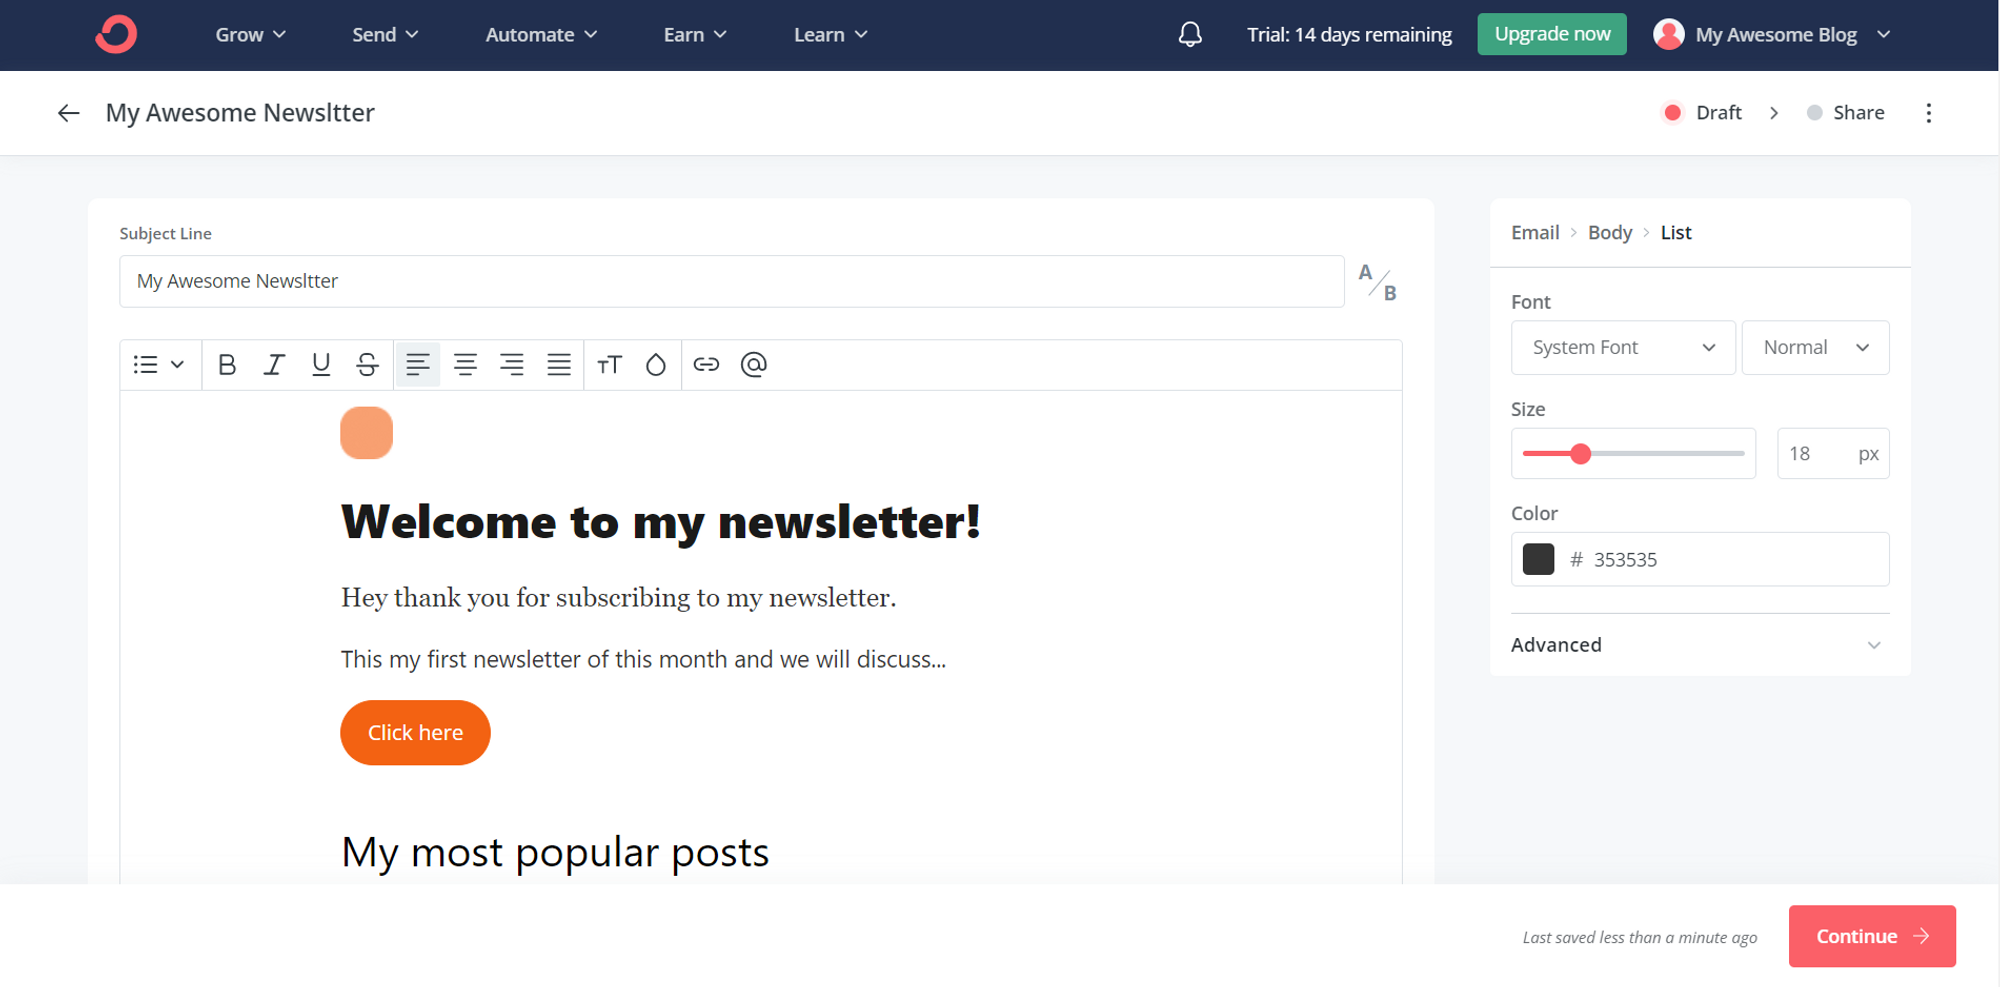 Step 4 - Send your first newsletter to your subscribers